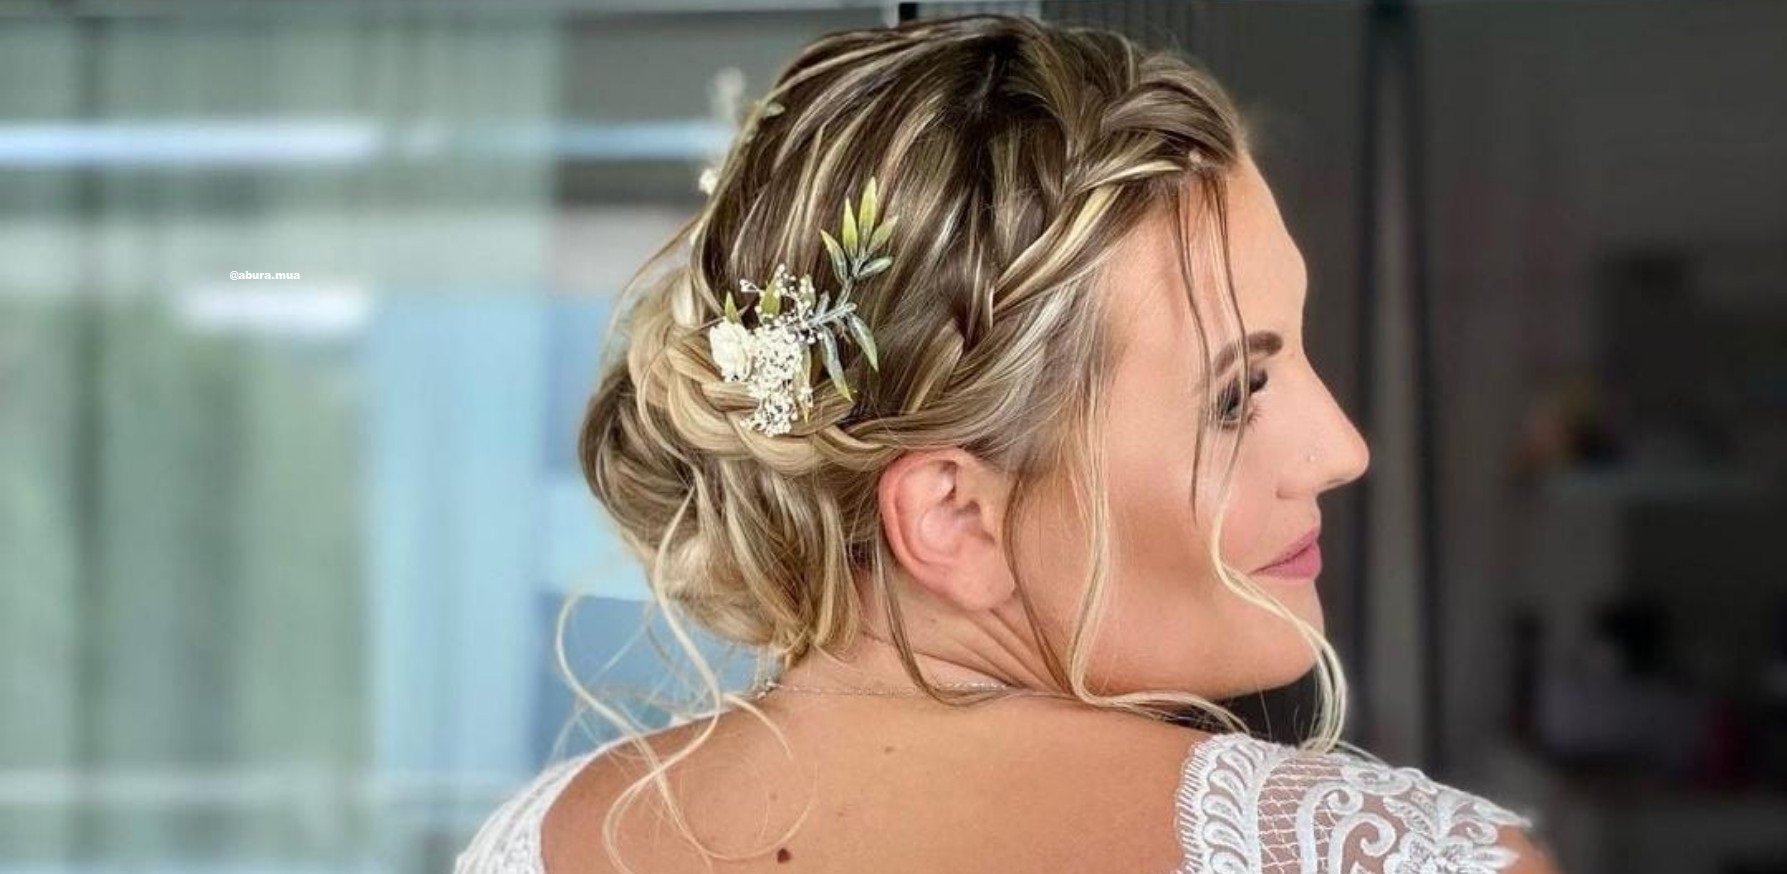 These Elegant Updos Are What You Need This Wedding Season